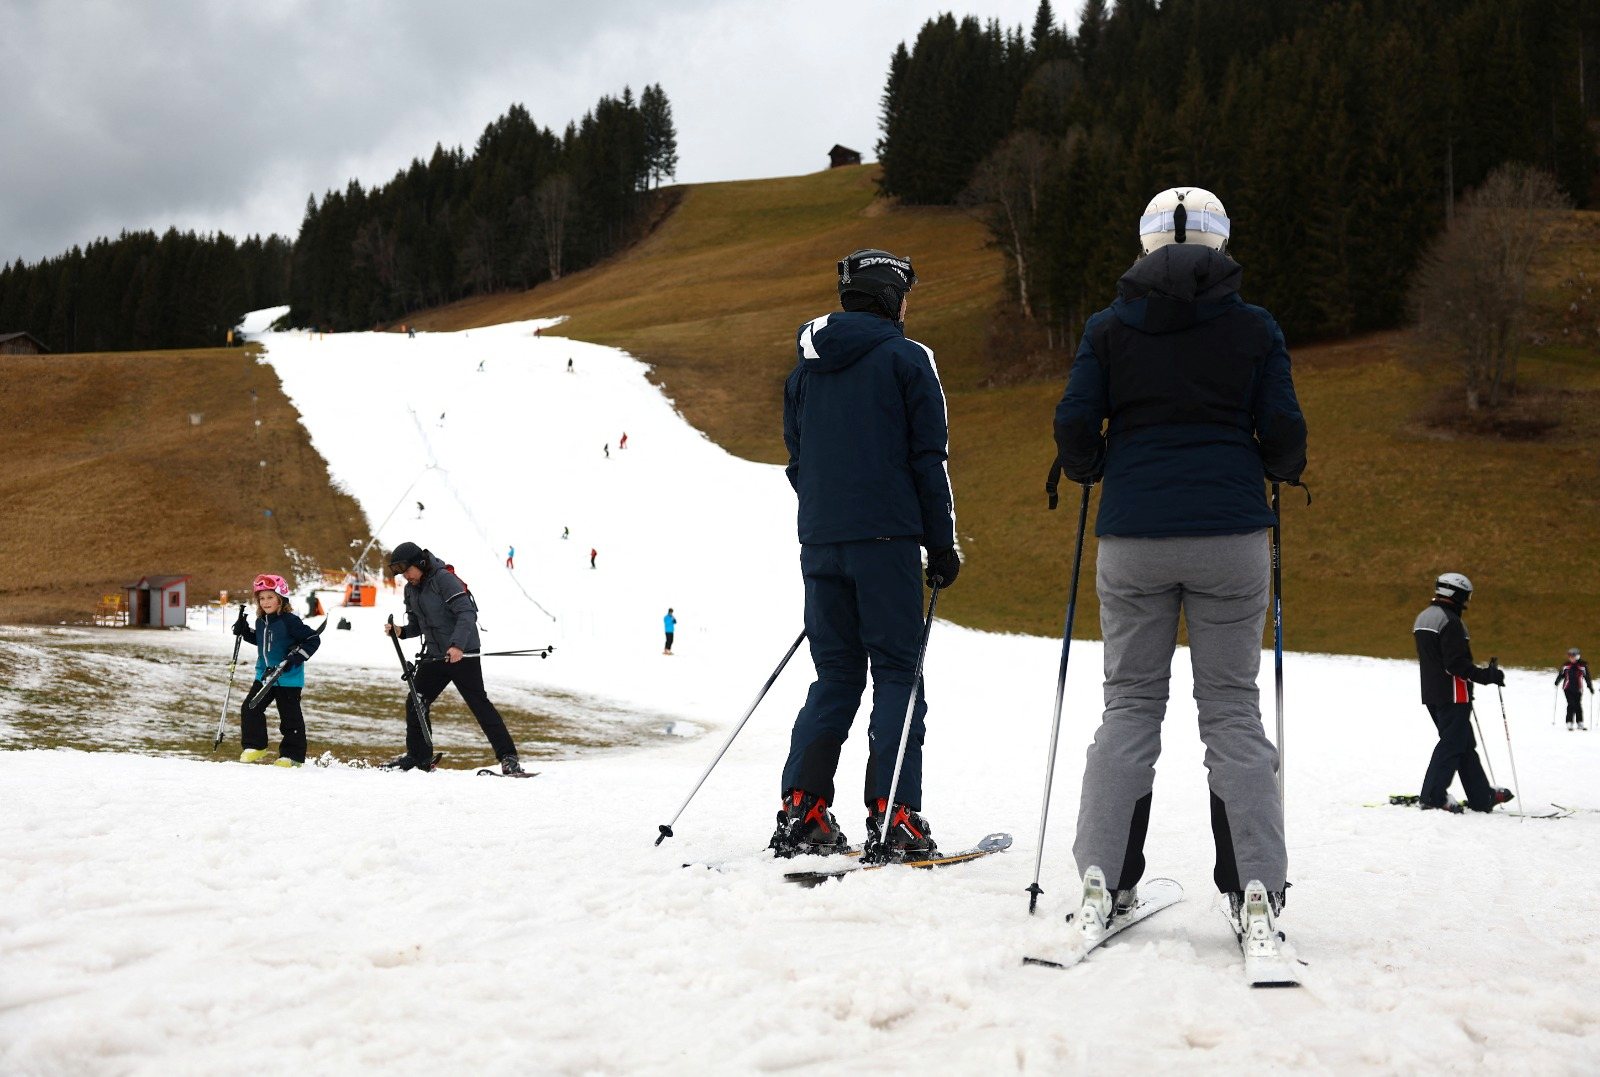 Skiers pass on a small layer of an artificial snow slope between grassland amid warmer-than-usual winter temperatures in the Alps in Filzmoos, Austria, January 5, 2023. REUTERS/Lisi Niesner